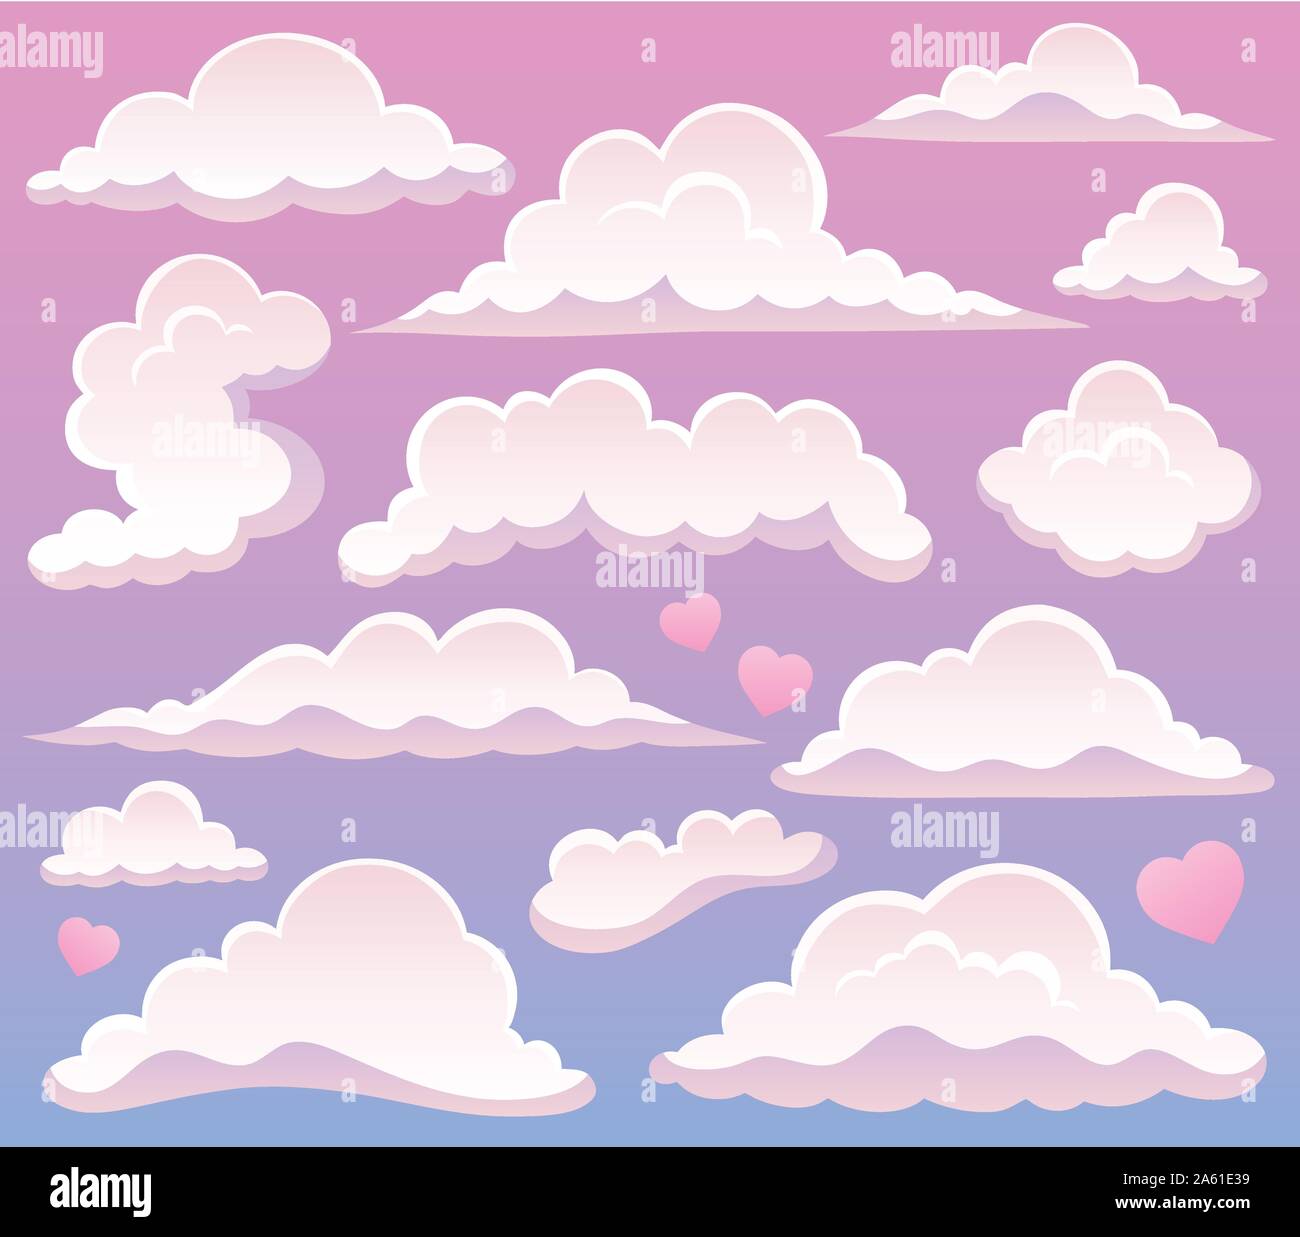 Clouds topic image 5 - eps10 vector illustration. Stock Vector